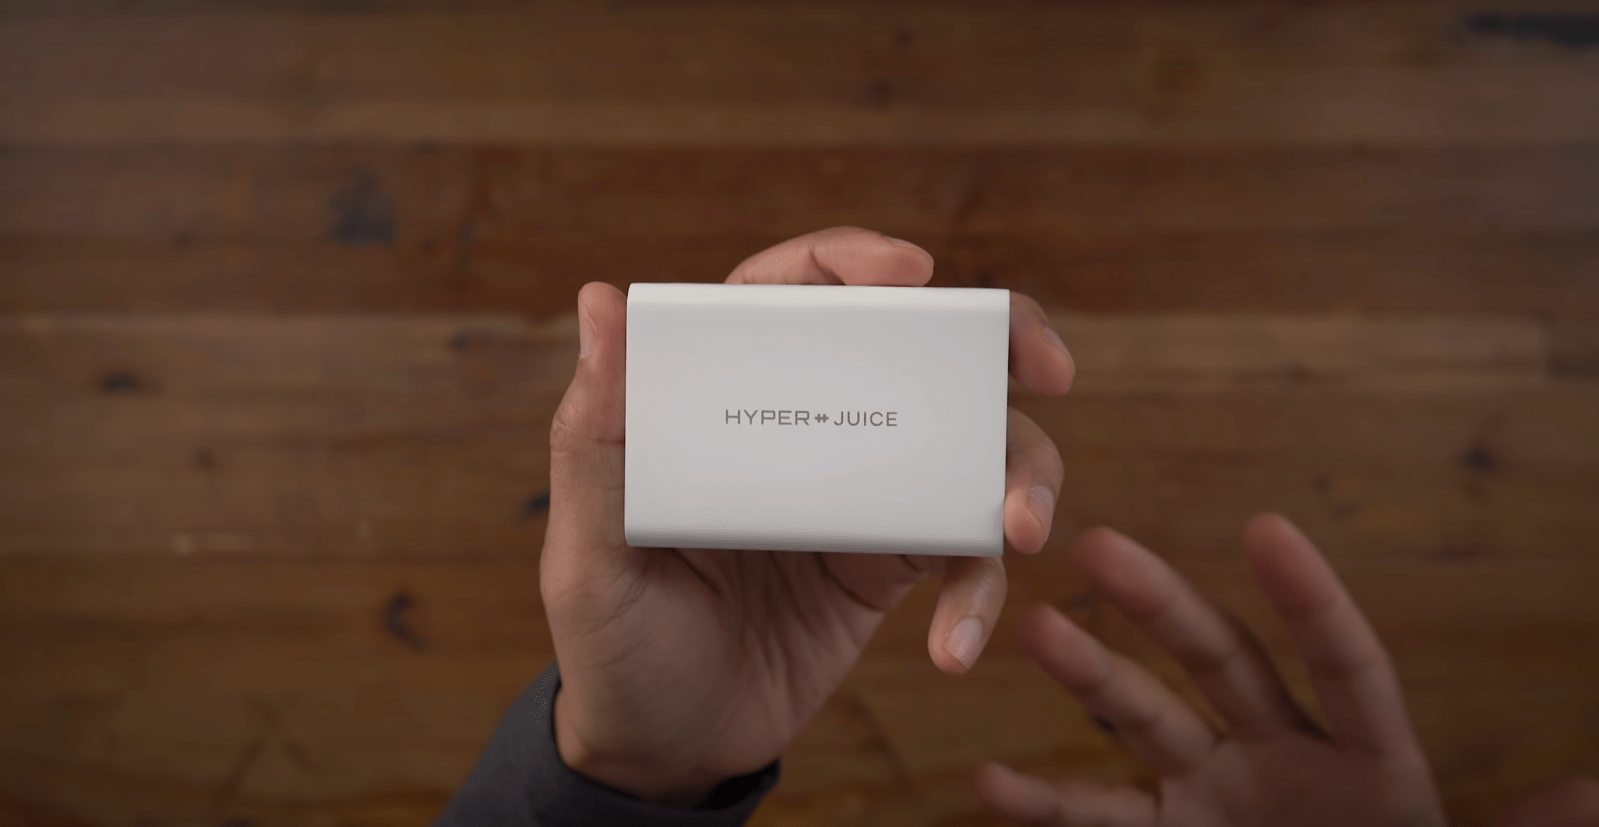 Hands-on the world's smallest 100W GaN USB-C charger from Hyper [Video] - 9to5Mac